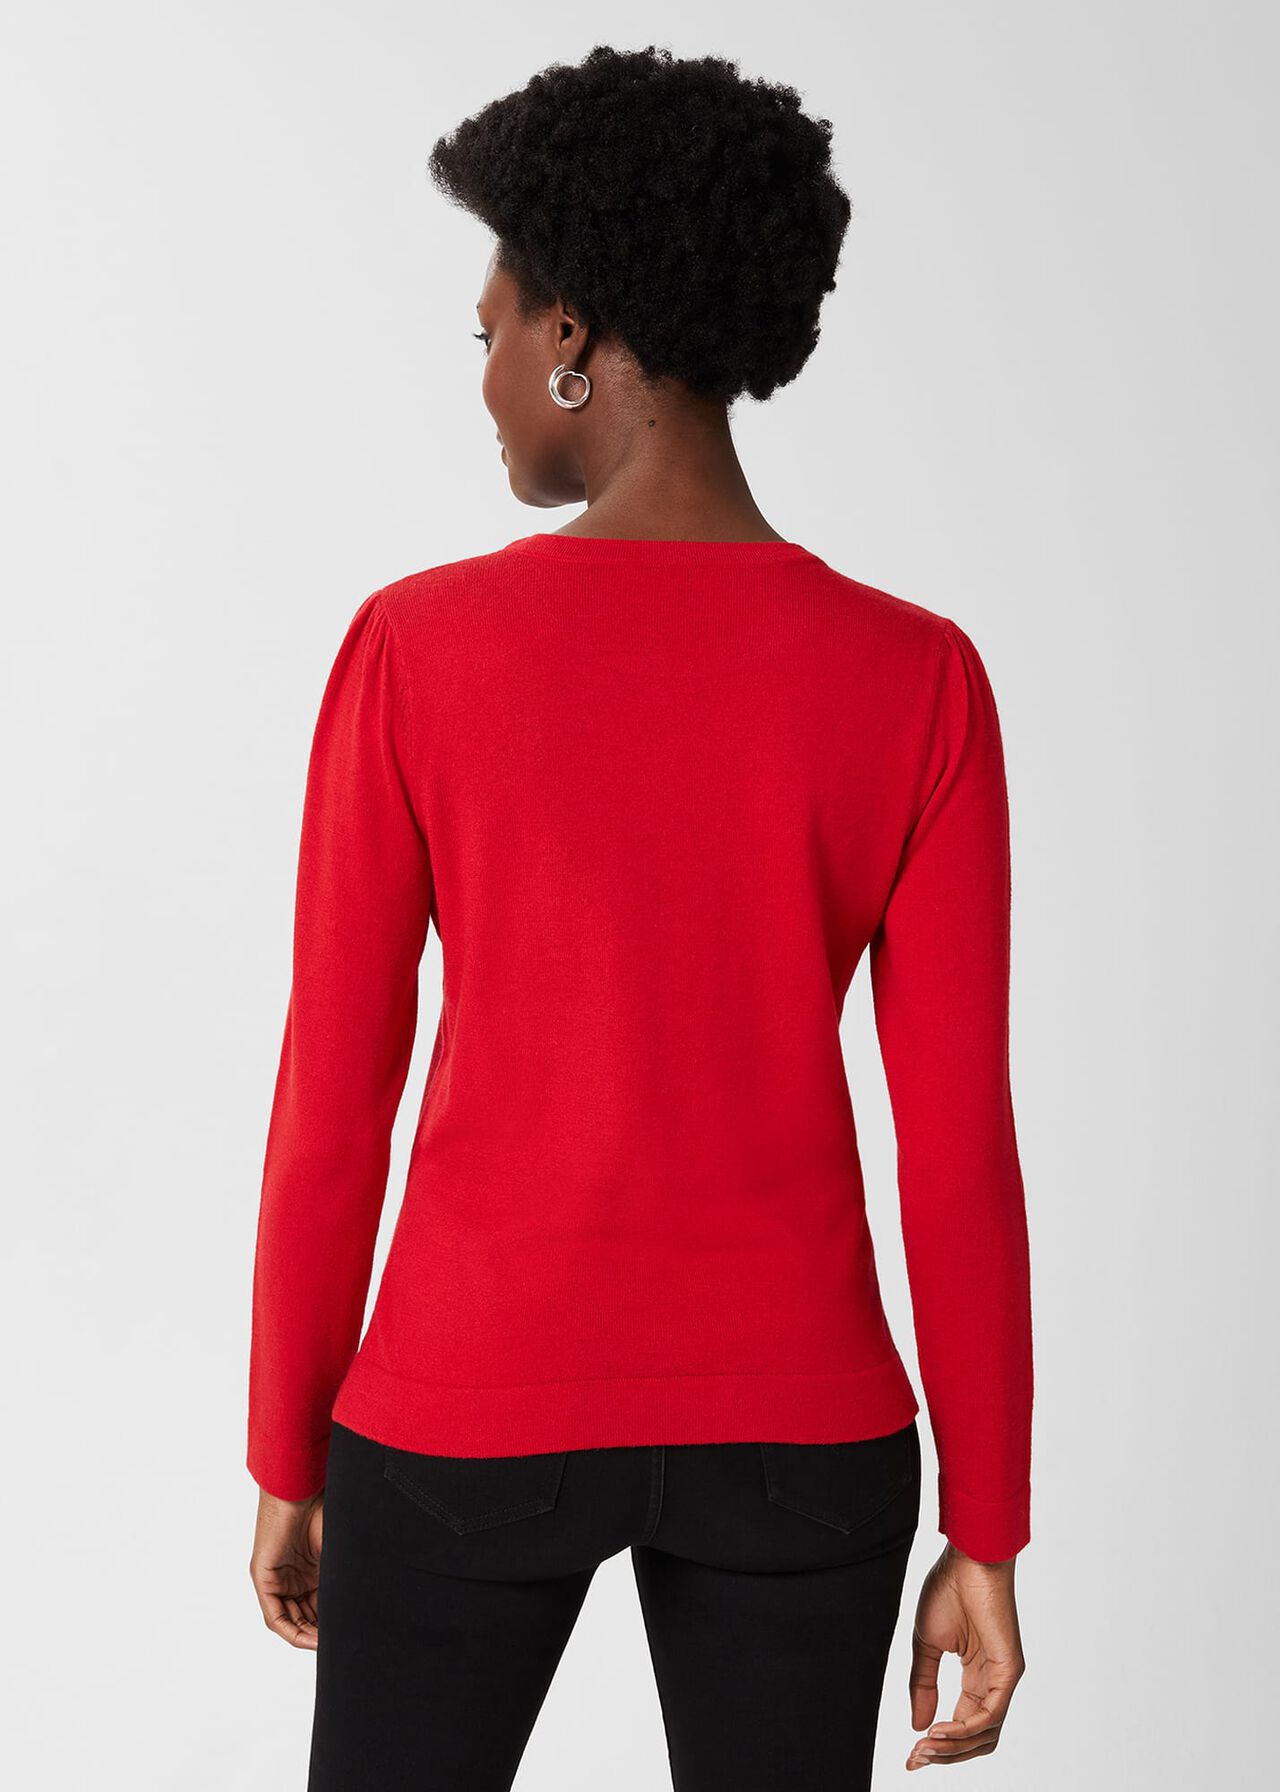 Marlena Sweater, Cherry Red, hi-res